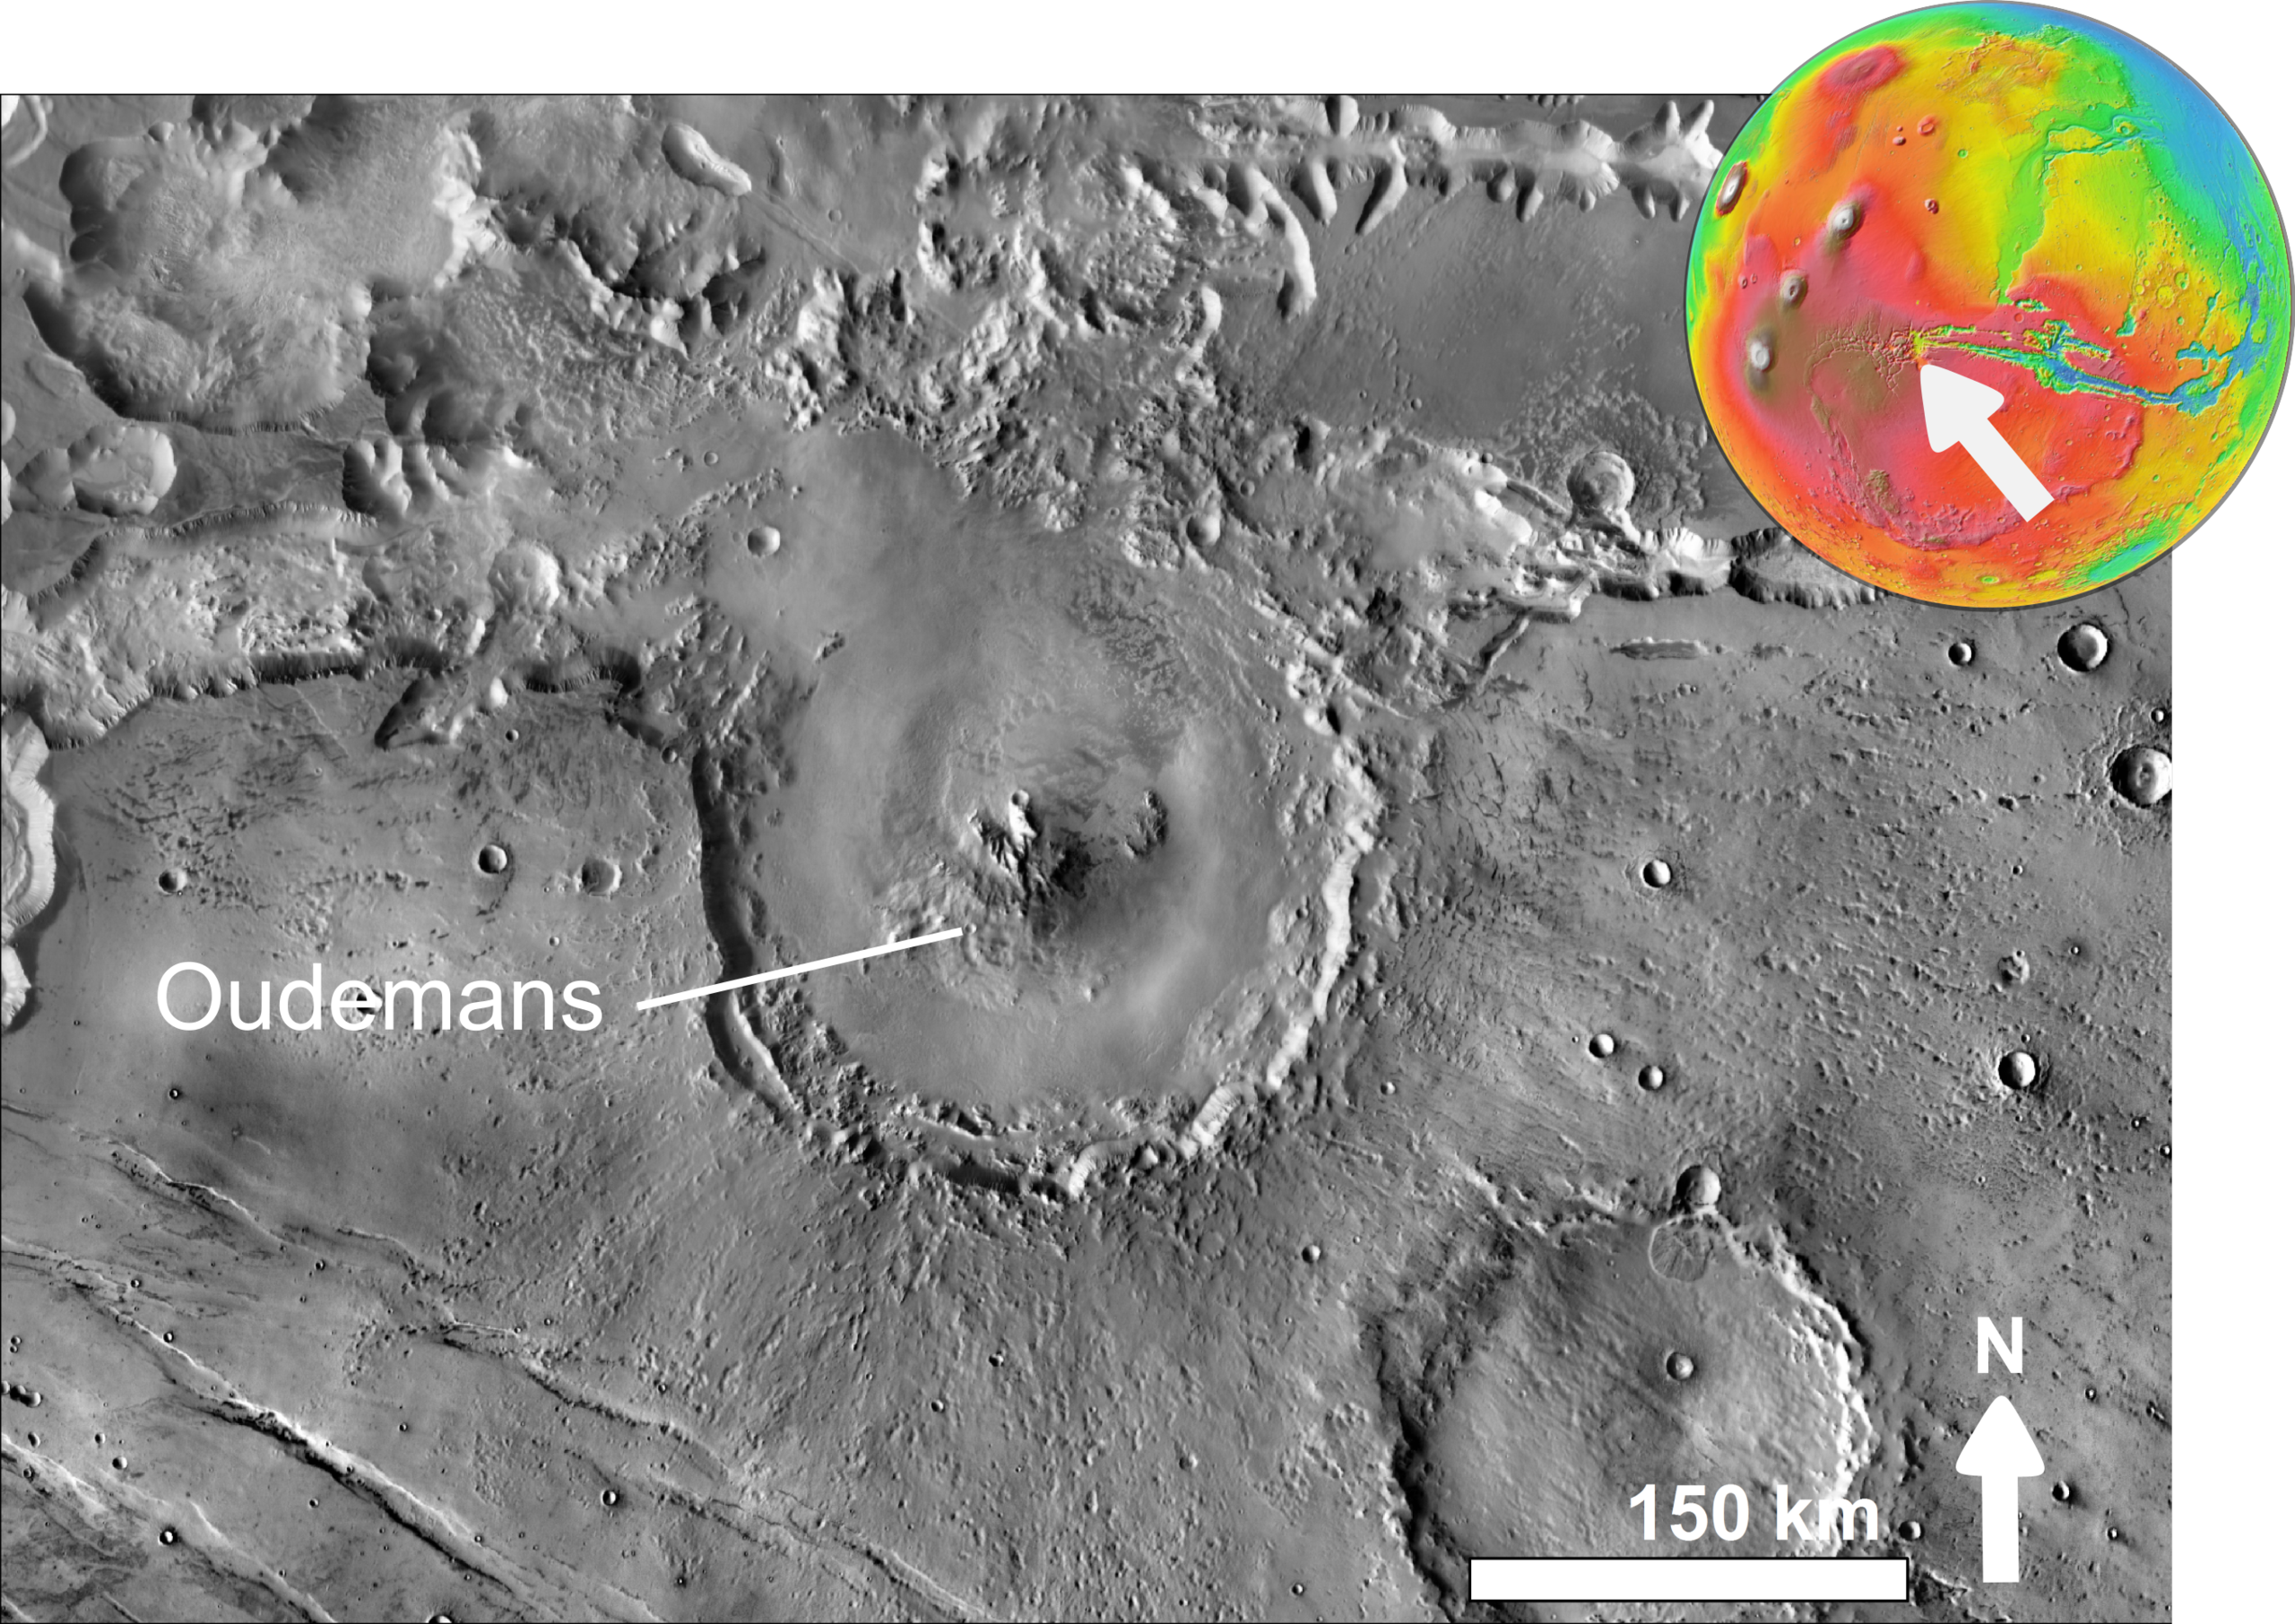 An image of a crater on Mars, emphasizing the natural wonder similar to the Mars Grand Canyon.